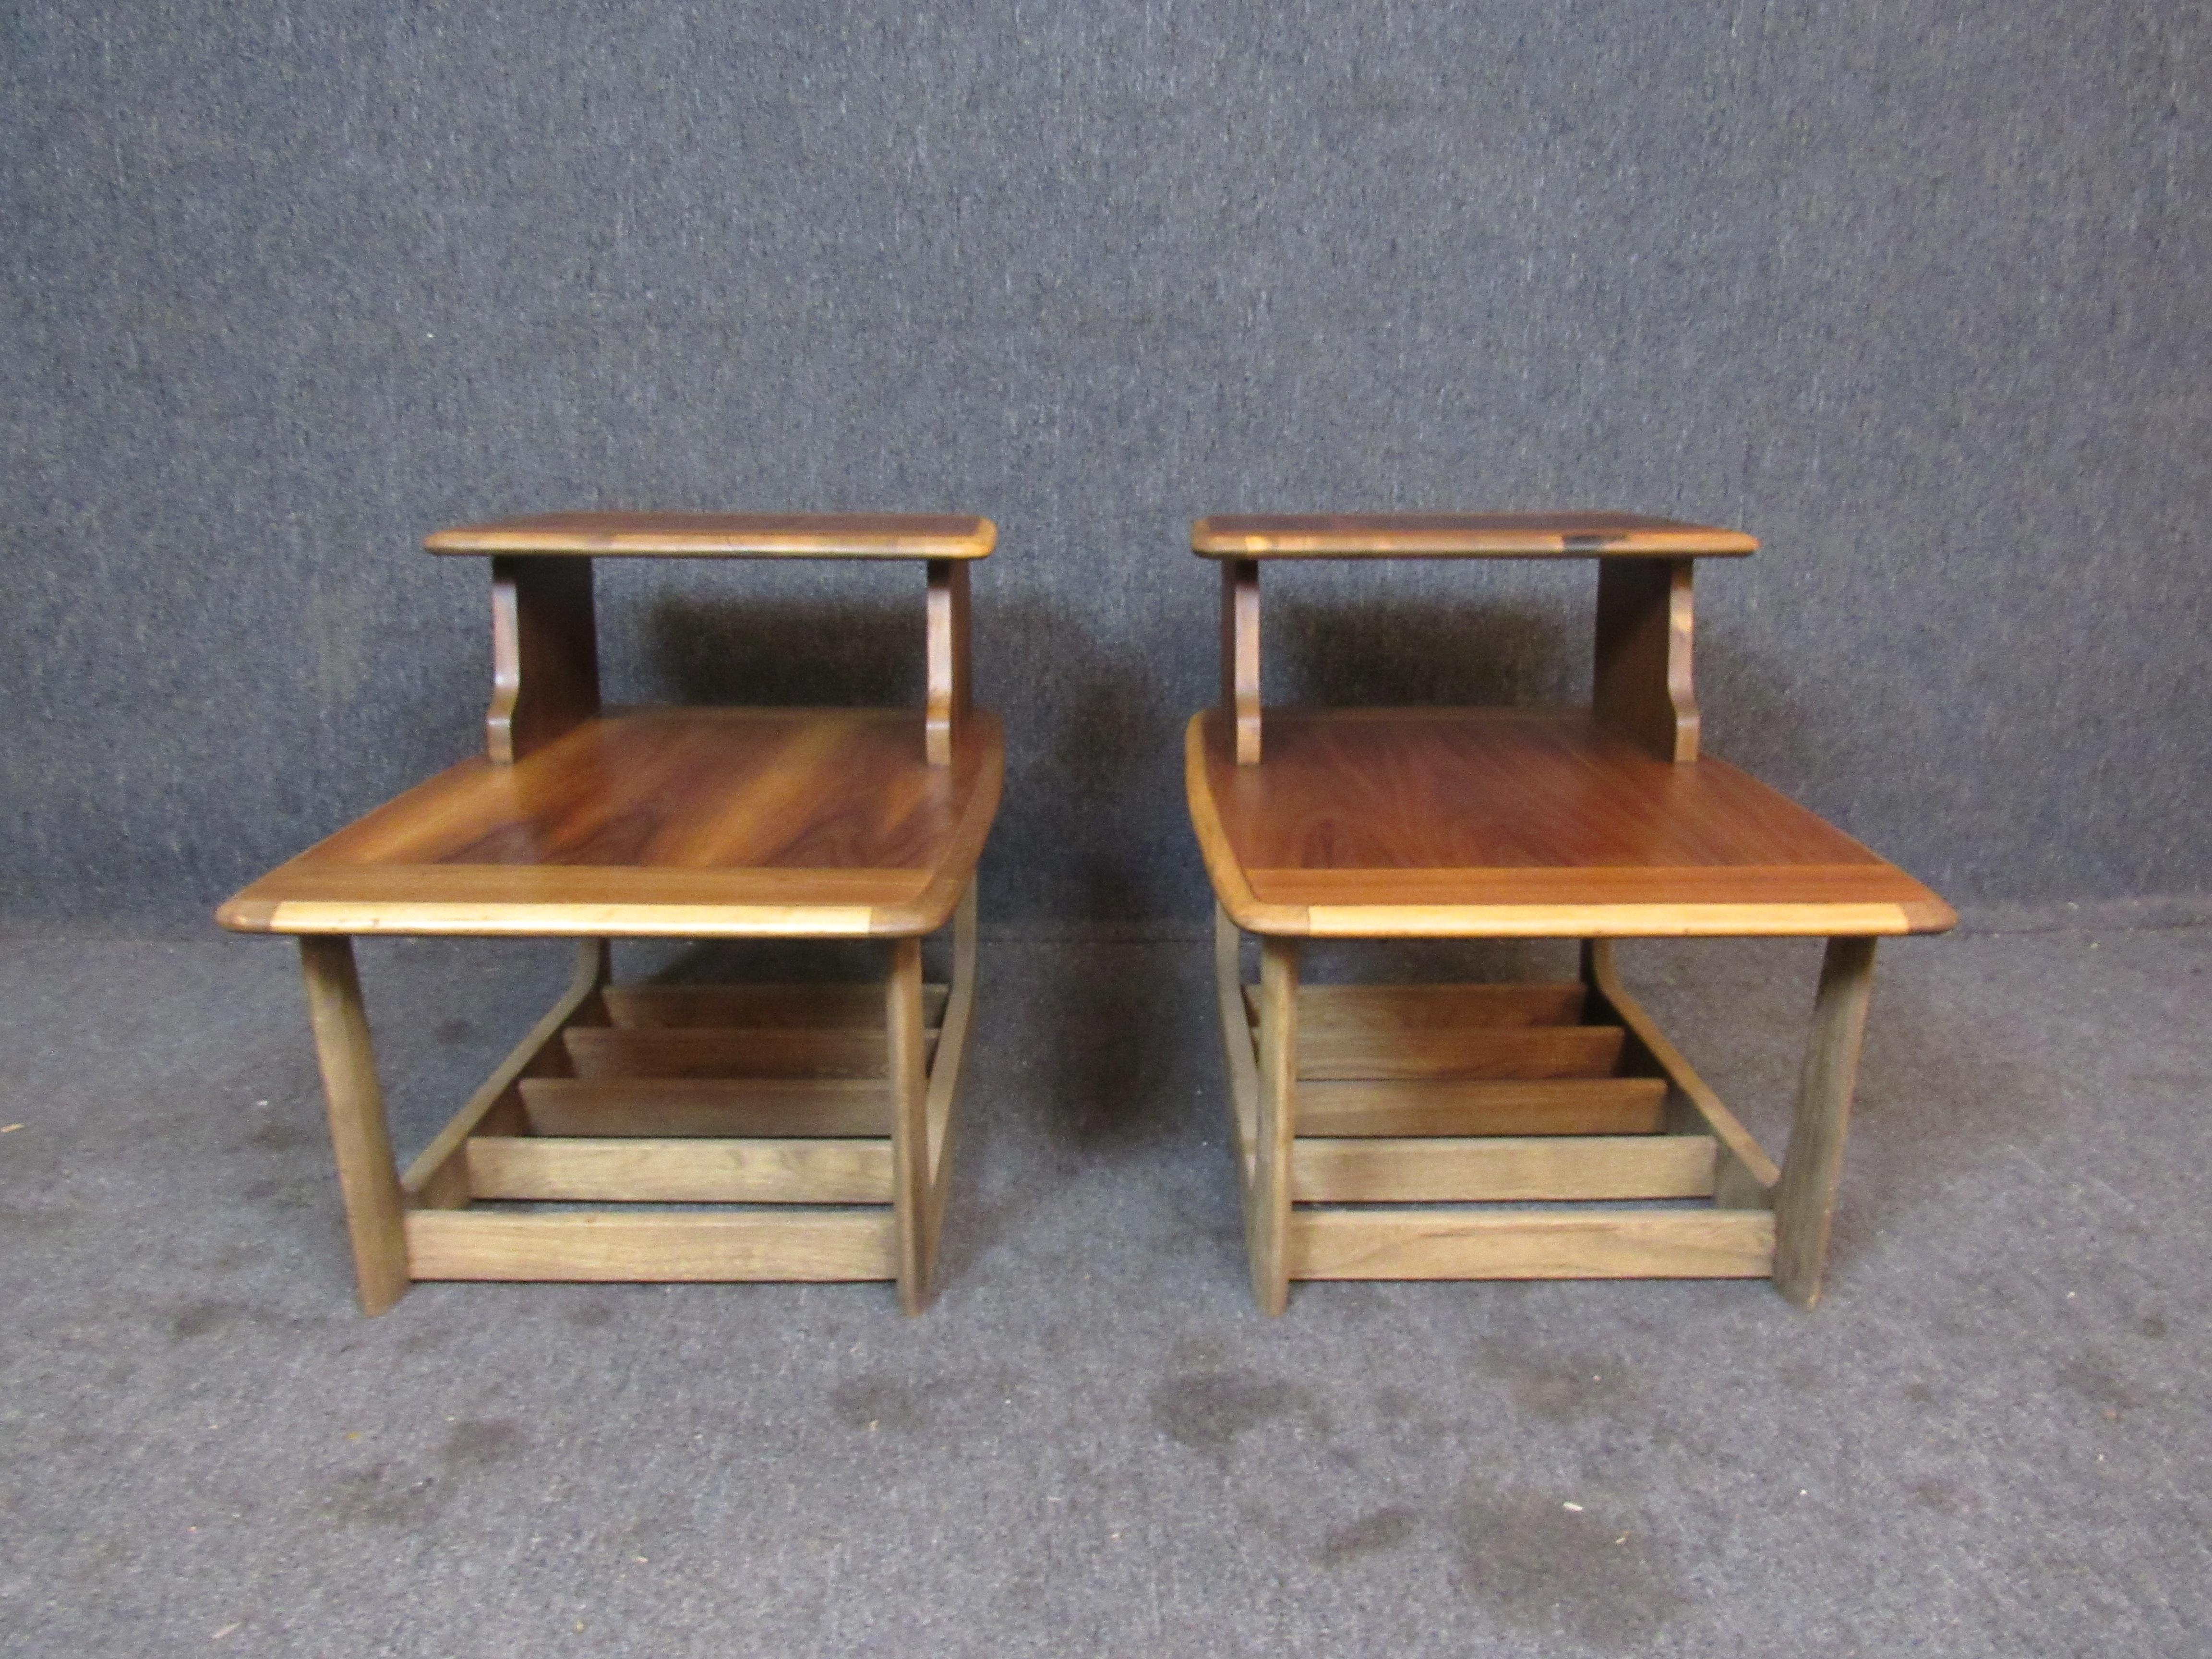 Fantastic pair of vintage step tables by the world-renowned craftsmen of Virginia's Bassett Furniture. Featuring gorgeously rich wood grains, sleek carved edges, a robust sled-leg base, and a convenient two-tiered design these tables offer as much